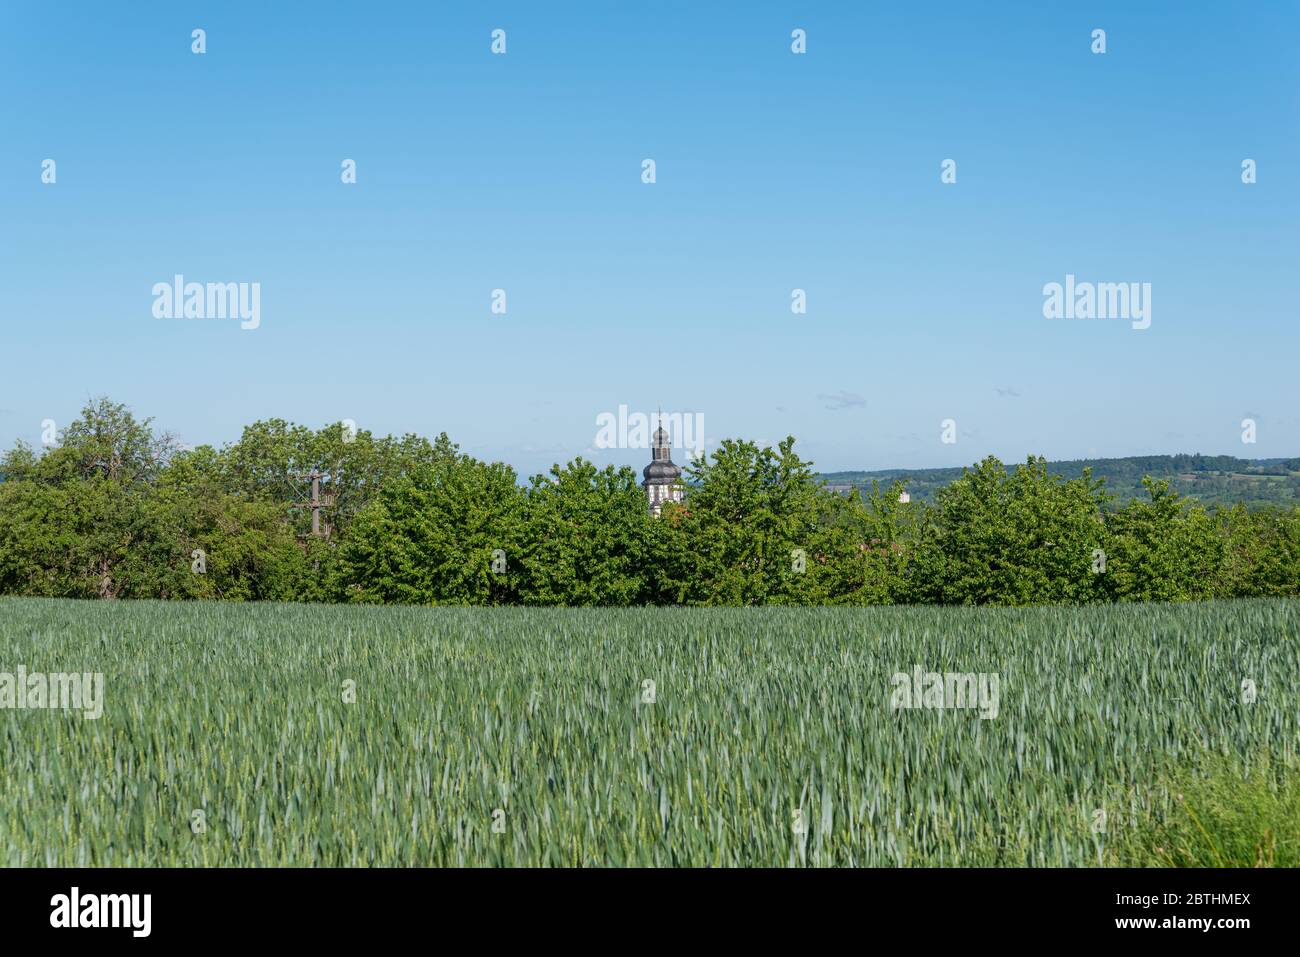 Grain field with half-timbered tower of the St Martin church in background, Gochsheim, Baden-Wurttemberg, Germany, Europe Stock Photo